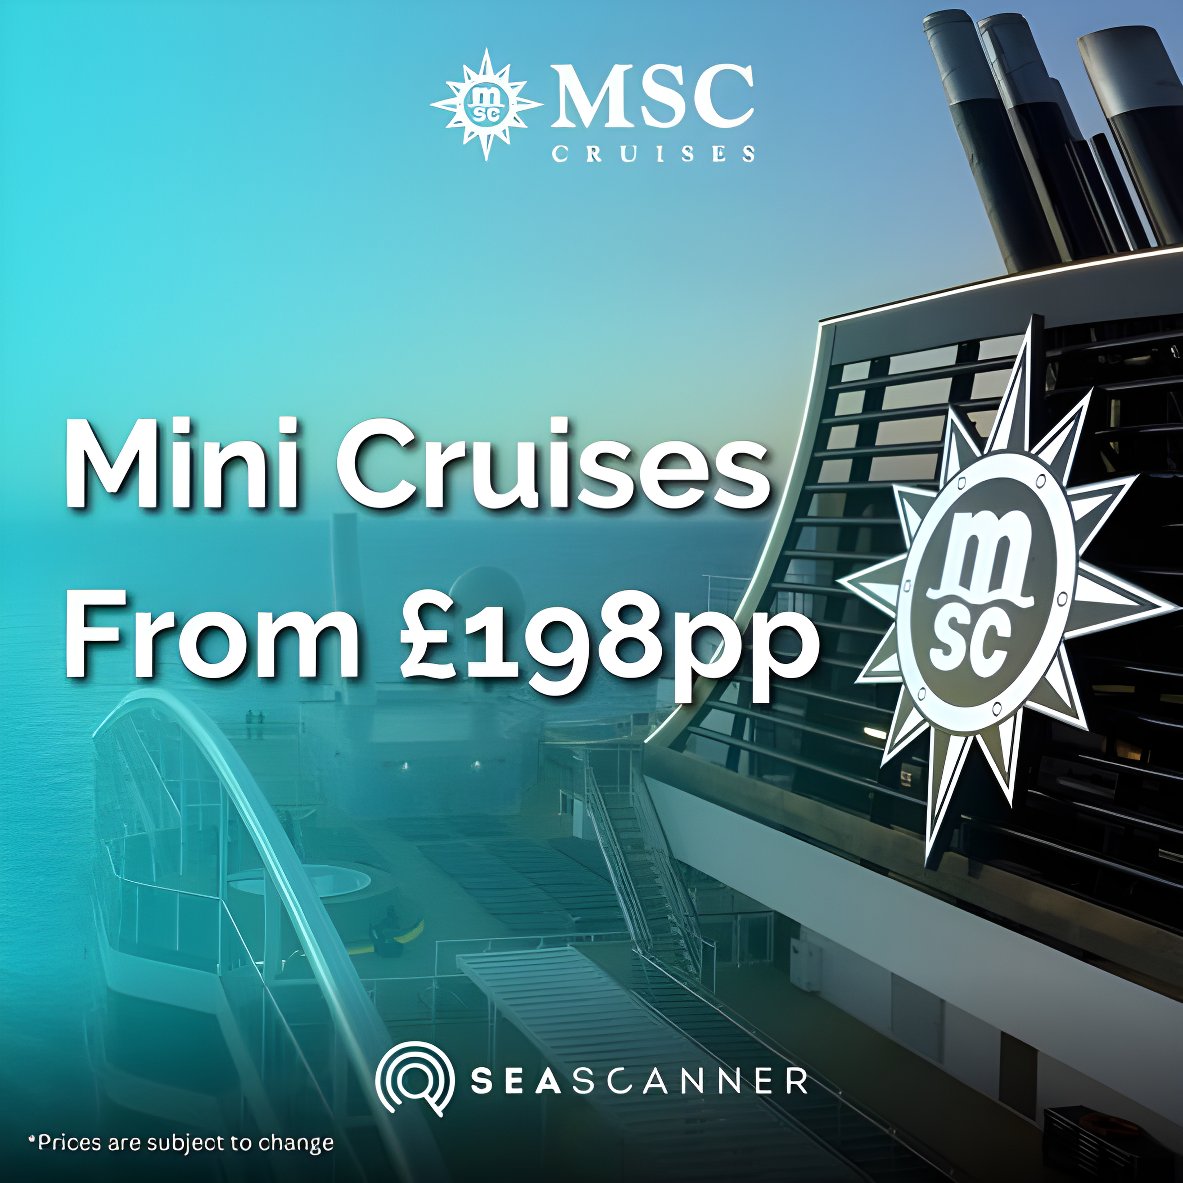 Mini cruises pack the joys of a longer cruise all into a few days. You can still indulge in all the luxuries, just in a shorter amount of time!✅ Book your MSC Cruises mini cruise with Seascanner UK. ✨Book Now! - tinyurl.com/2md63x3b